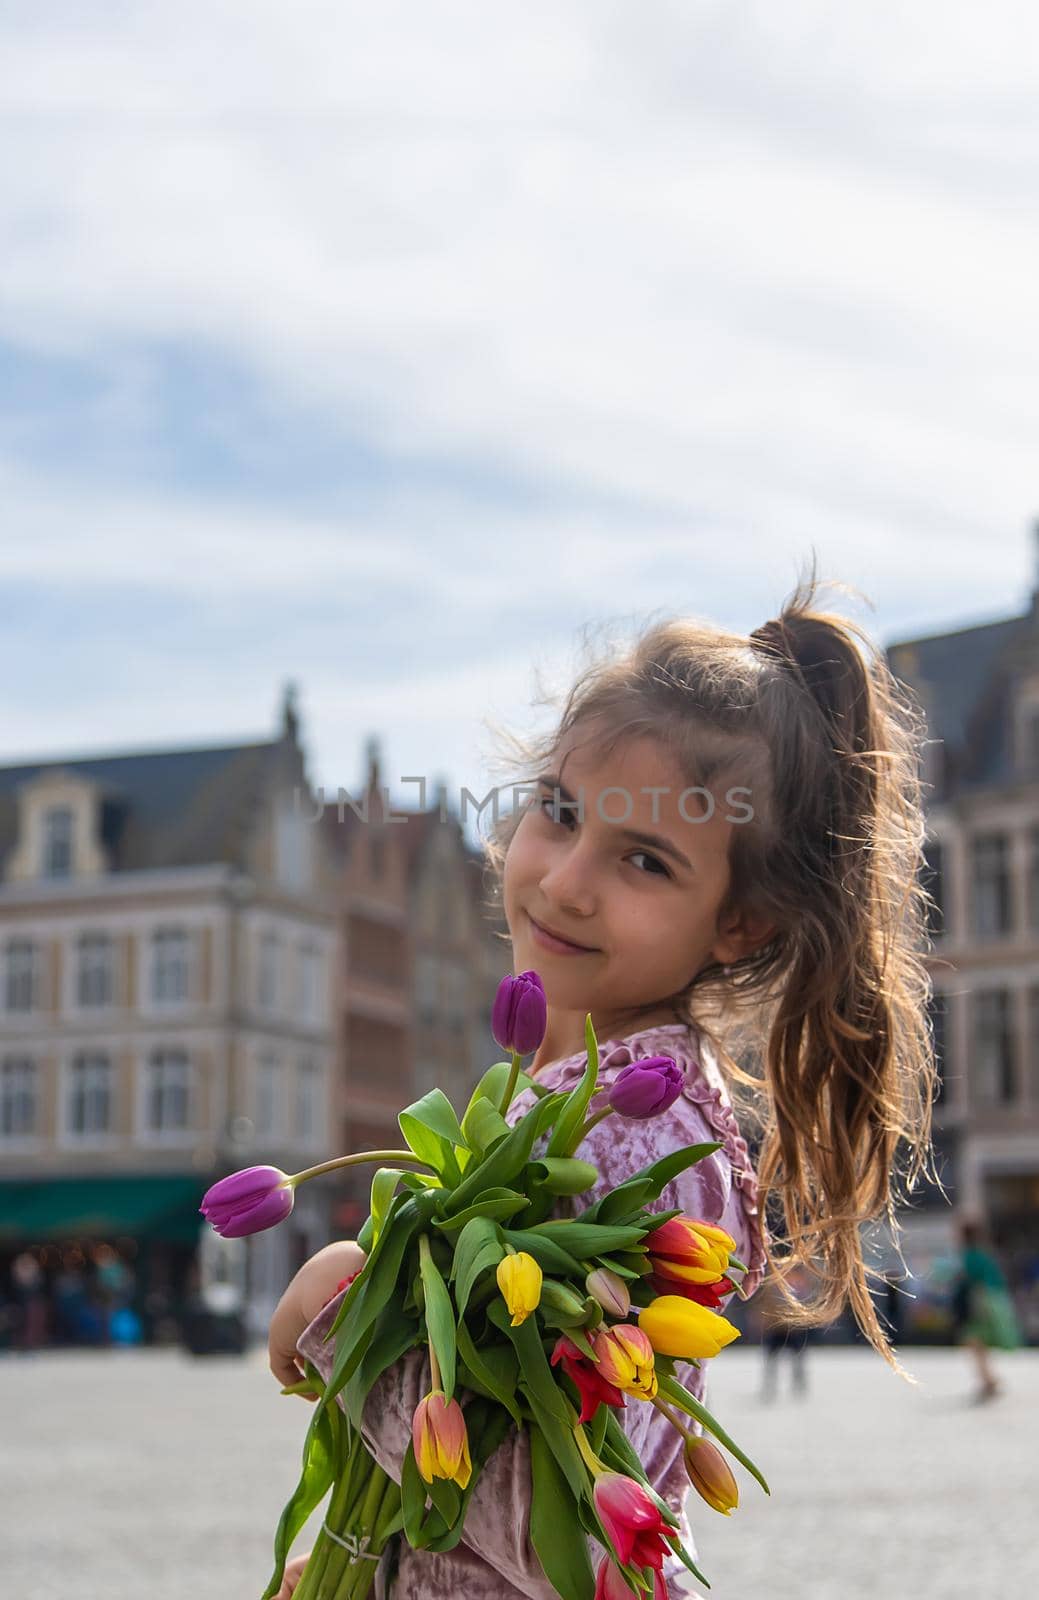 Child with a bouquet of tulips in the city. Selective focus. Kid.